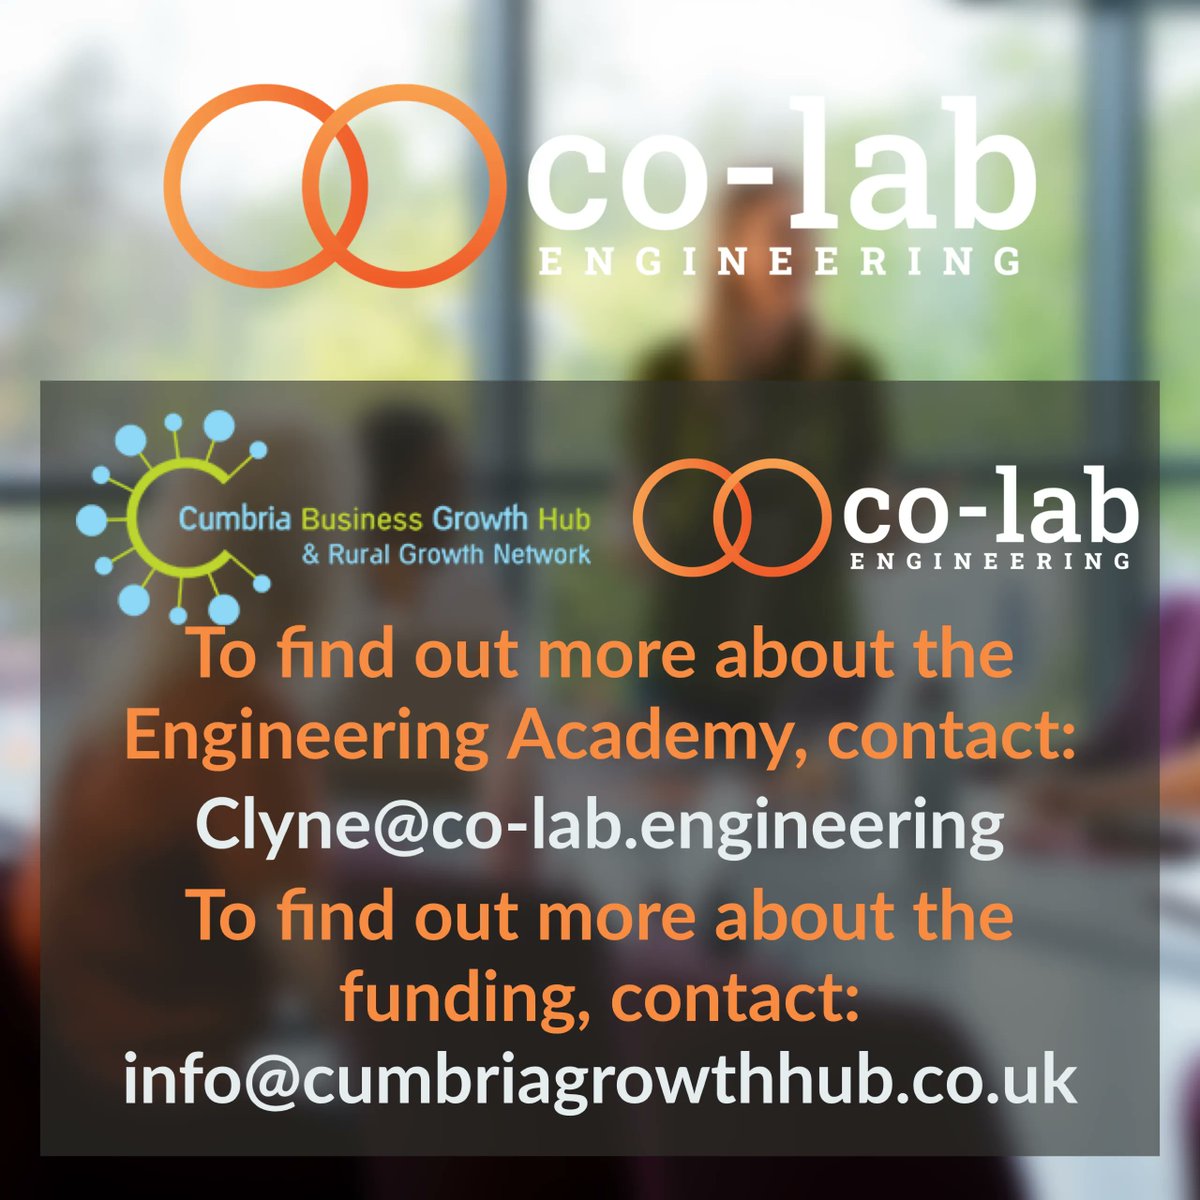 test Twitter Media - We are excited to be working with @Co_Lab_Eng, offering part funding for placements on their flagship programme – The Engineering Academy. Find our more about the programme here: https://t.co/fJzCVtBG7O 

Contact us to register interest: info@cumbriagrowthhub.co.uk https://t.co/TF5cJP509K